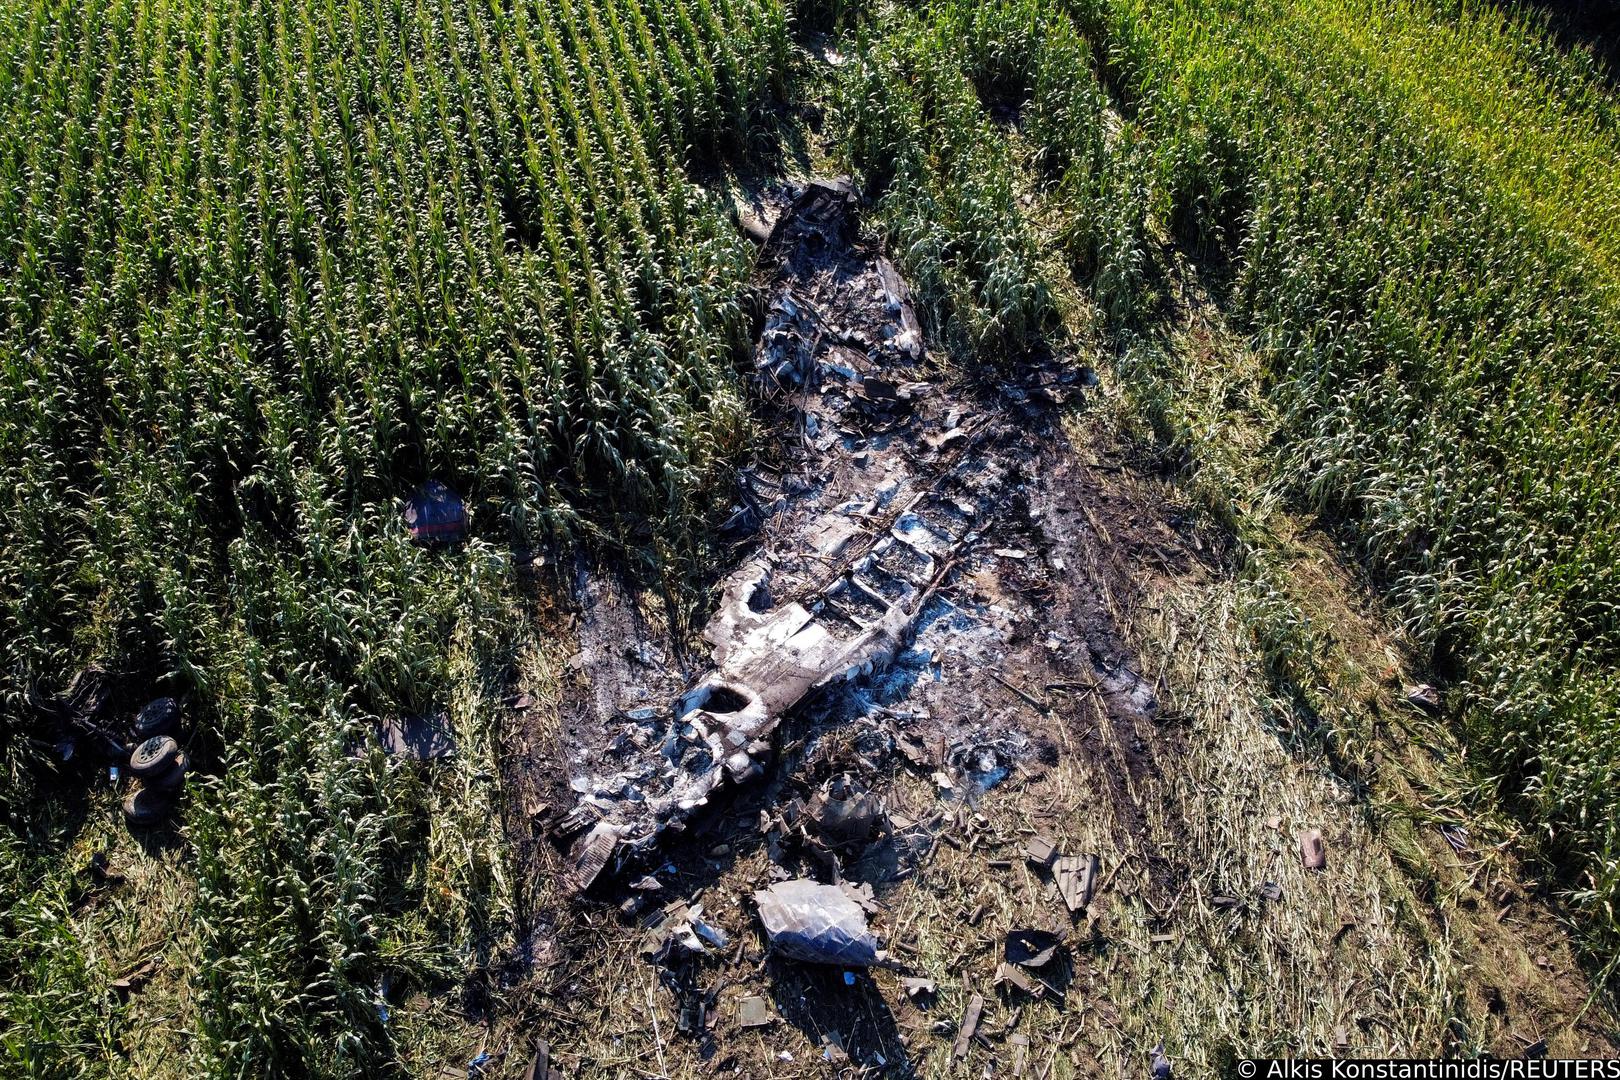 Debris is seen at the crash site of an Antonov An-12 cargo plane owned by a Ukrainian company, near Kavala, Greece, July 17, 2022. REUTERS/Alkis Konstantinidis Photo: Alkis Konstantinidis/REUTERS